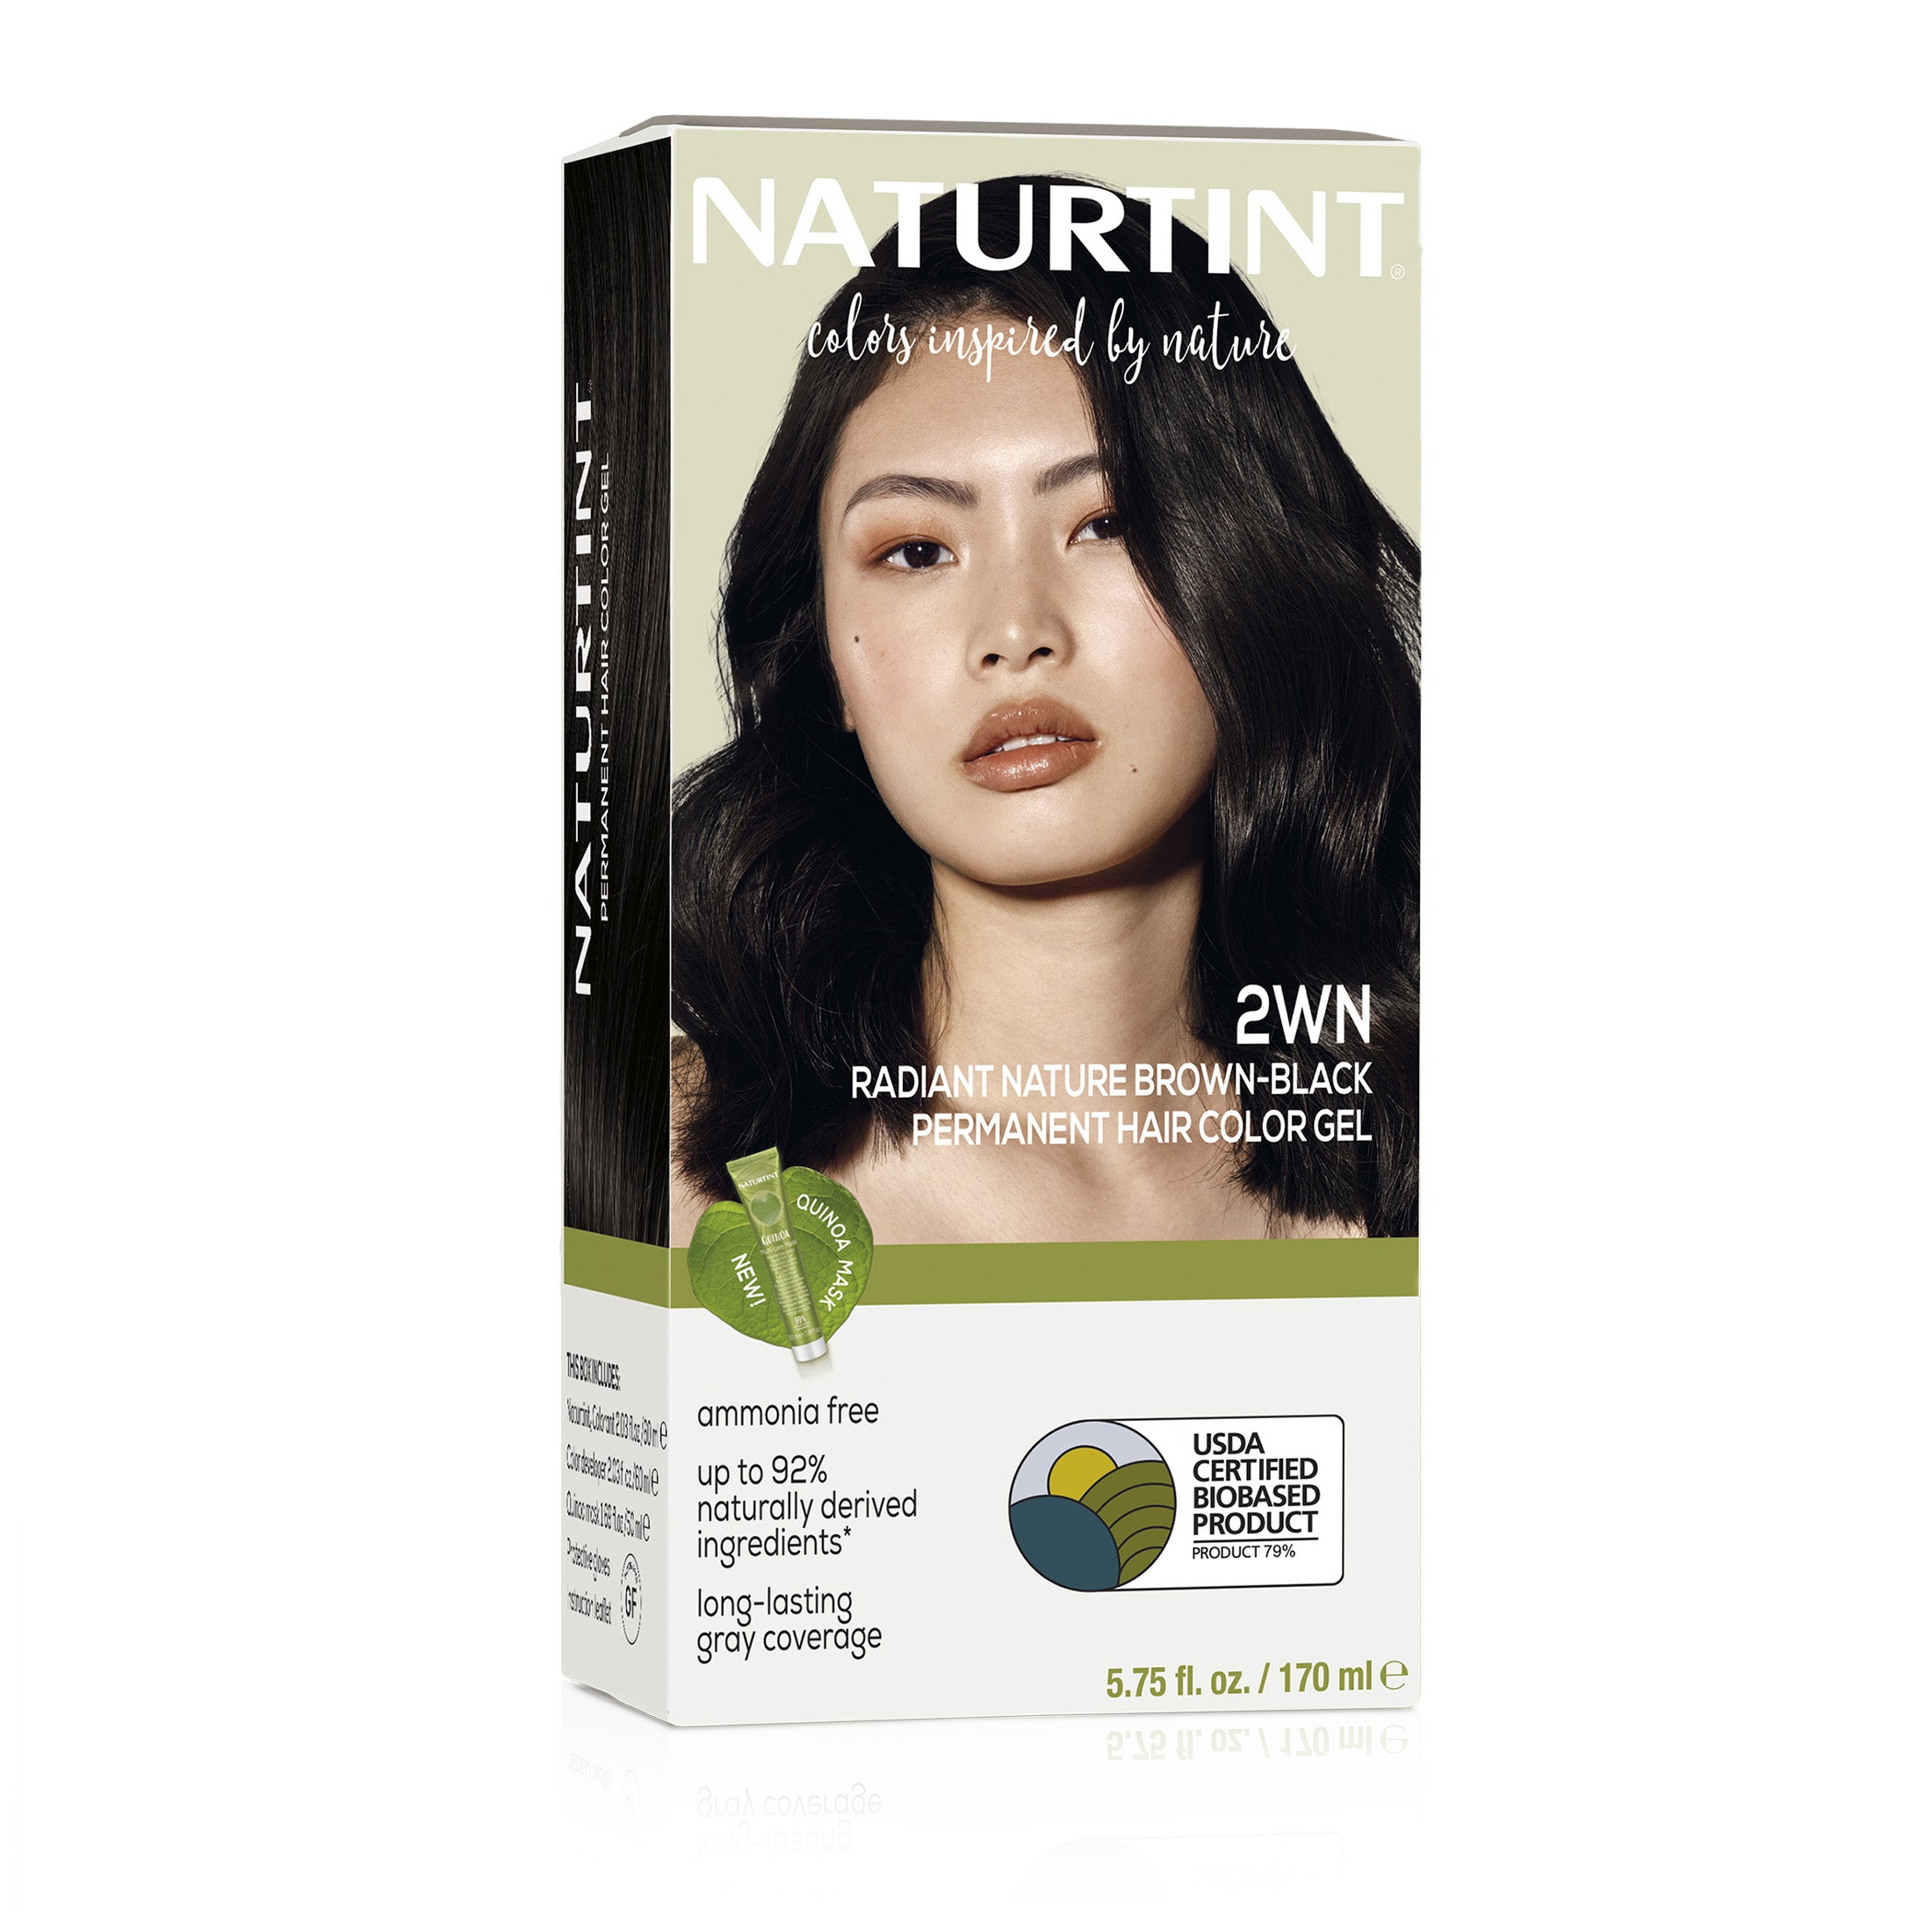 Naturtint Permanent Hair Color 2WN Radiant Nature Brown Black - image 1 of 5